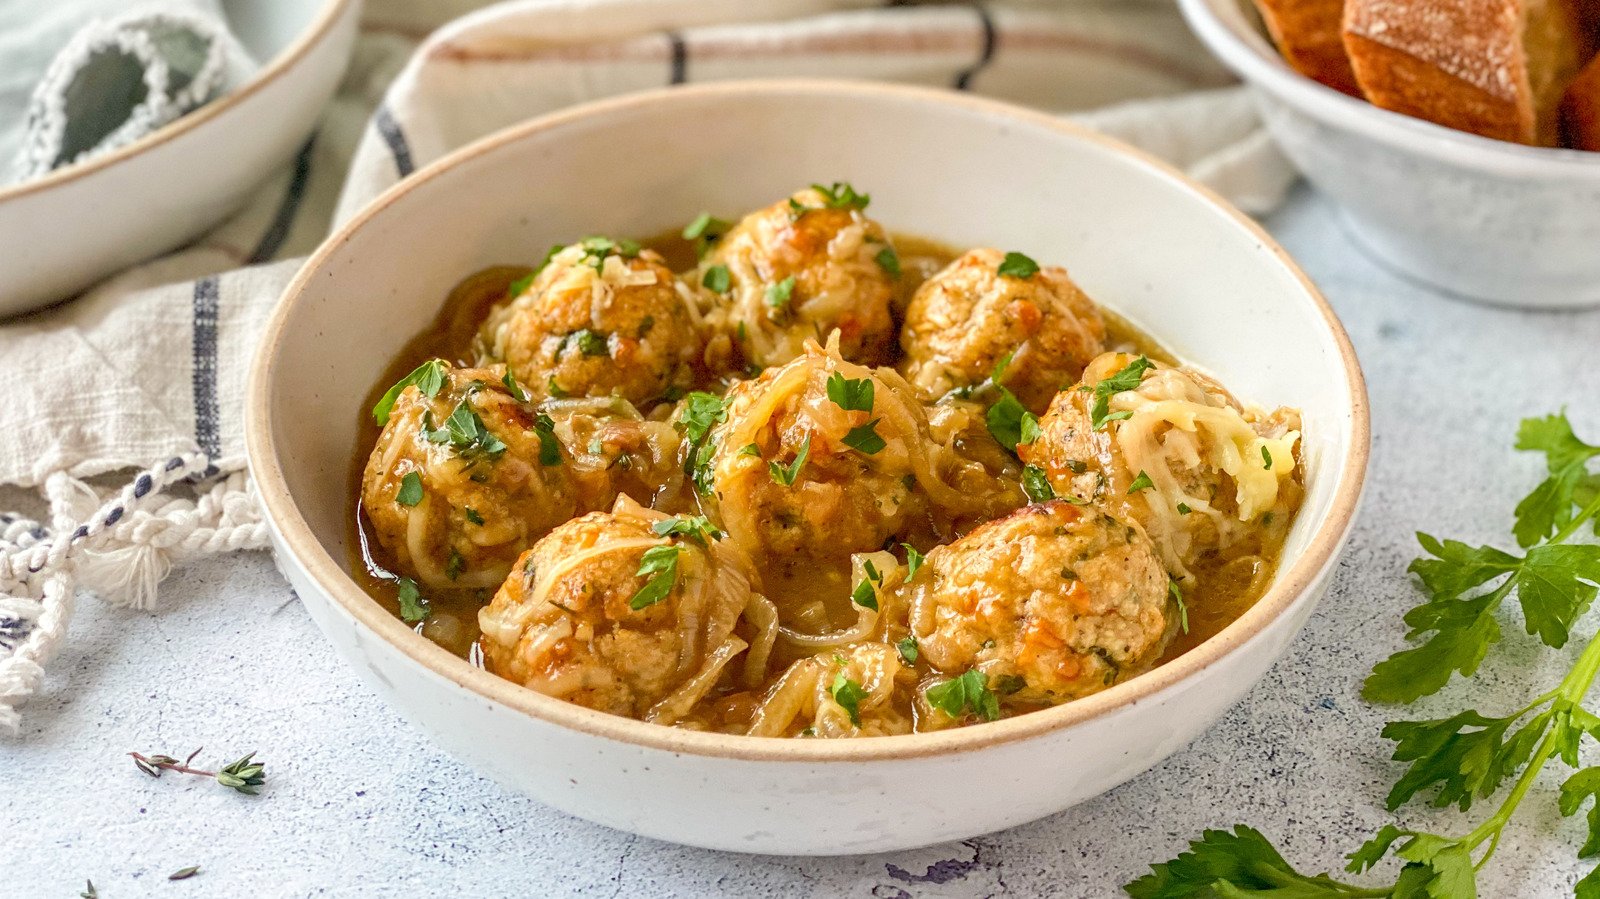 Every Reason Why You Should Try This French Onion Chicken Meatballs Recipe